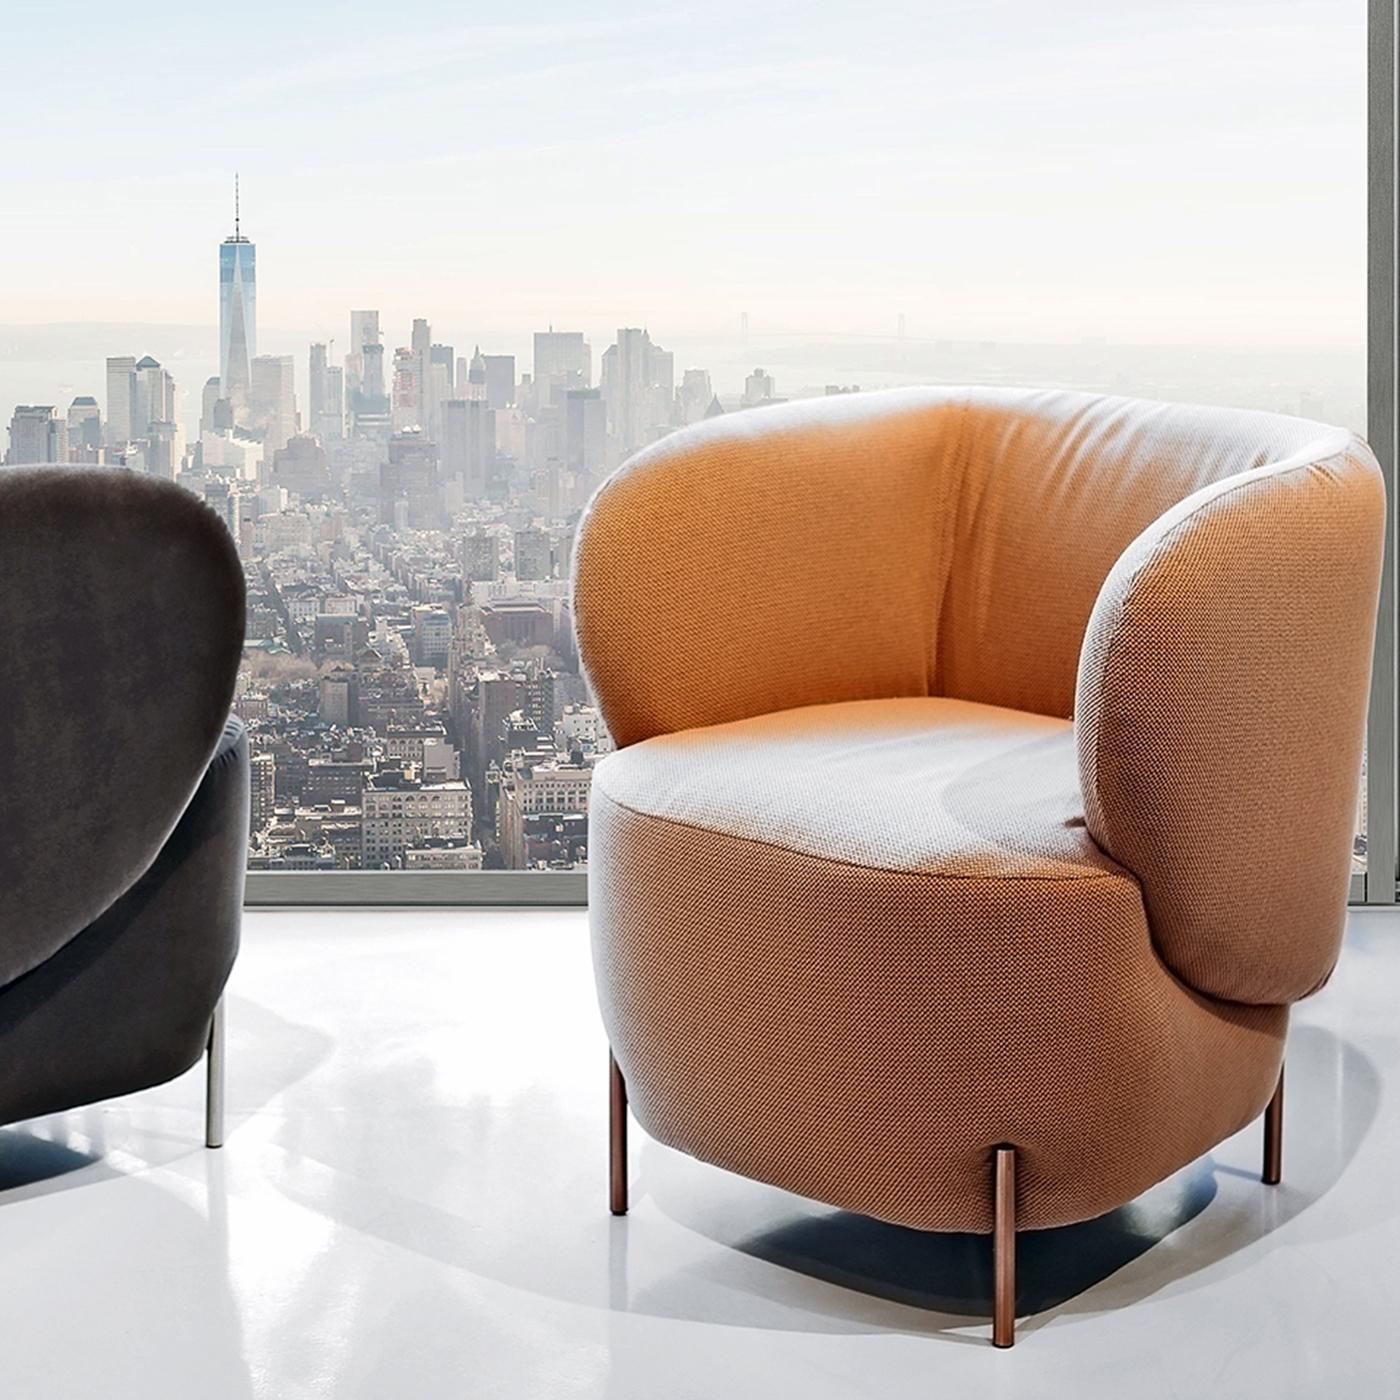 LaBimba is an upholstered indoor armchair. The Italian name means 